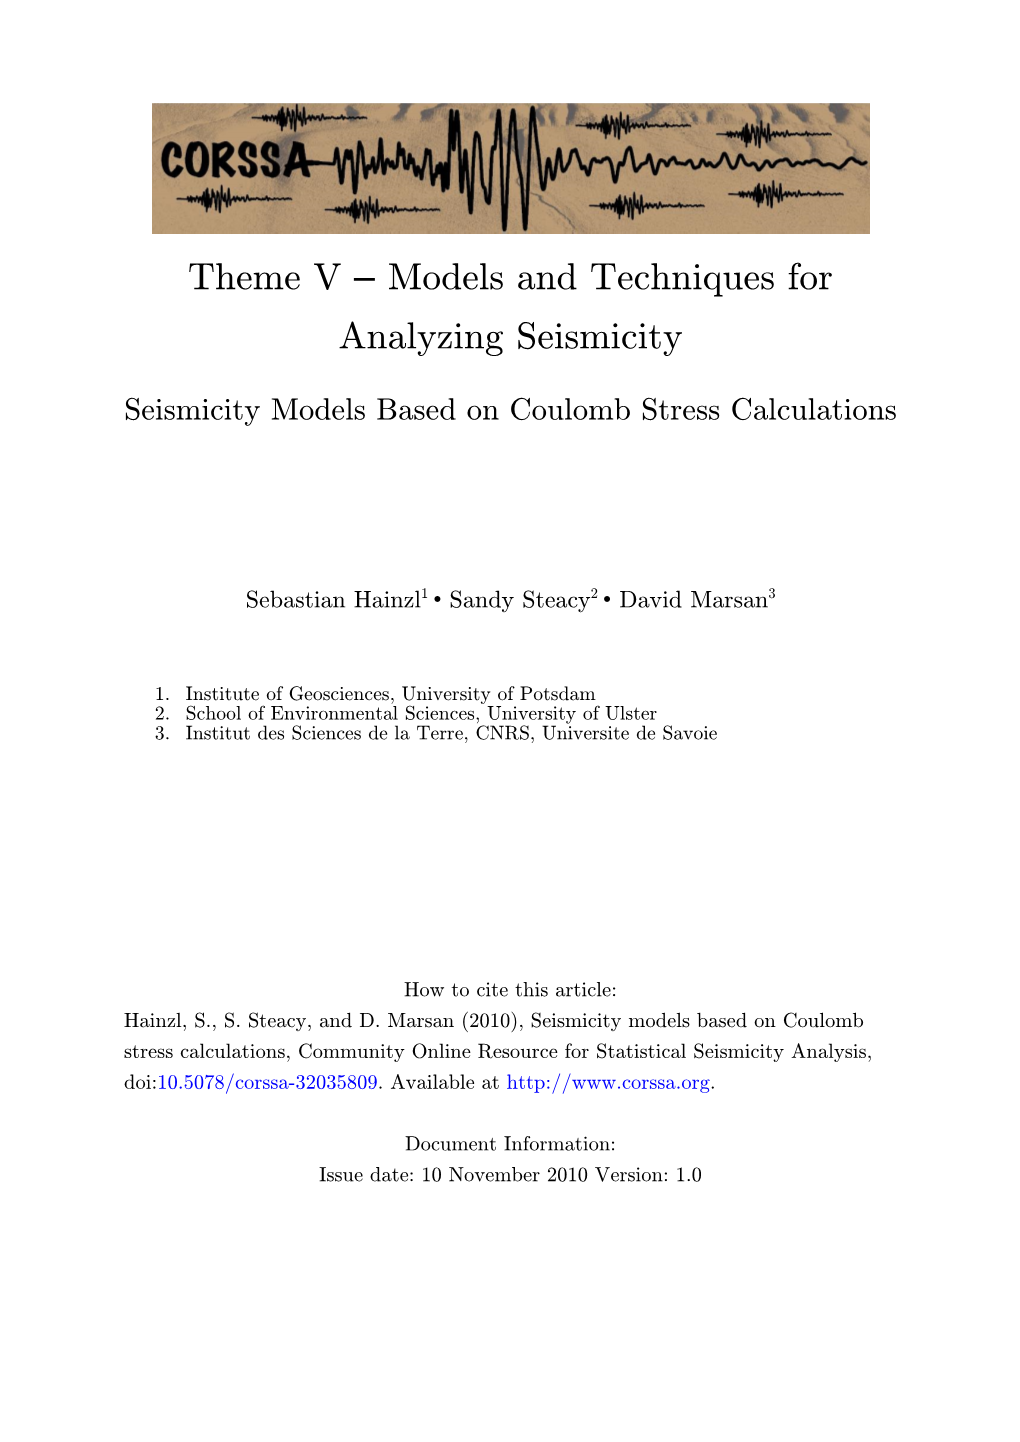 Seismicity Models Based on Coulomb Stress Calculations